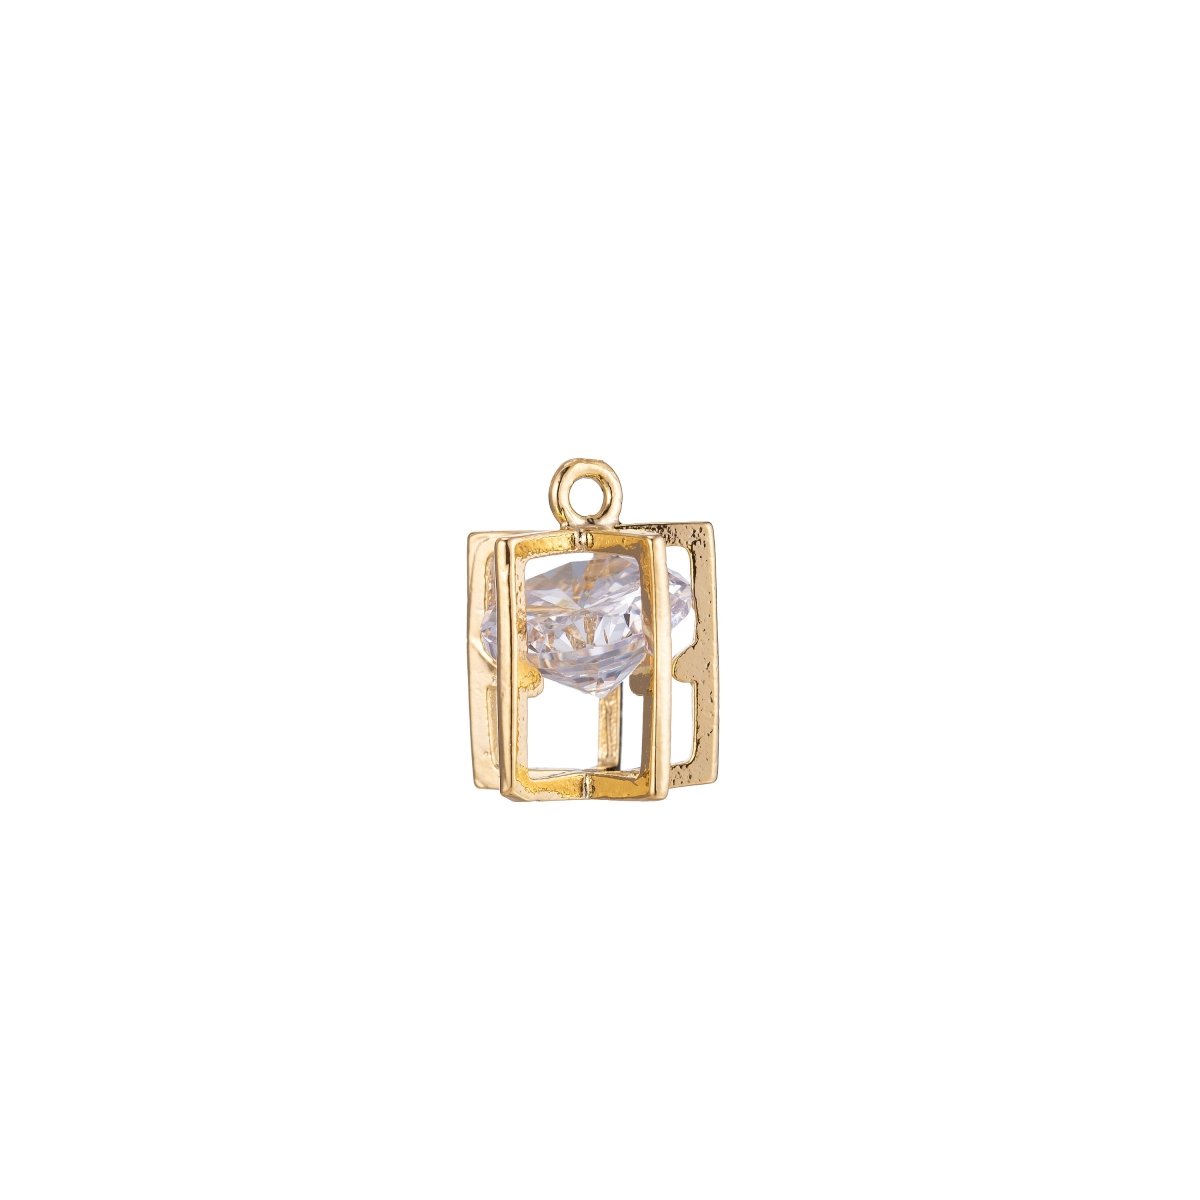 Geometric 3D Rectangle Charm, Micro Pave CZ Charm, Dainty Pendant Floating Crystal Modern Prong Chic Bar Necklace Charm for Jewelry Making, CL-E-417 - DLUXCA